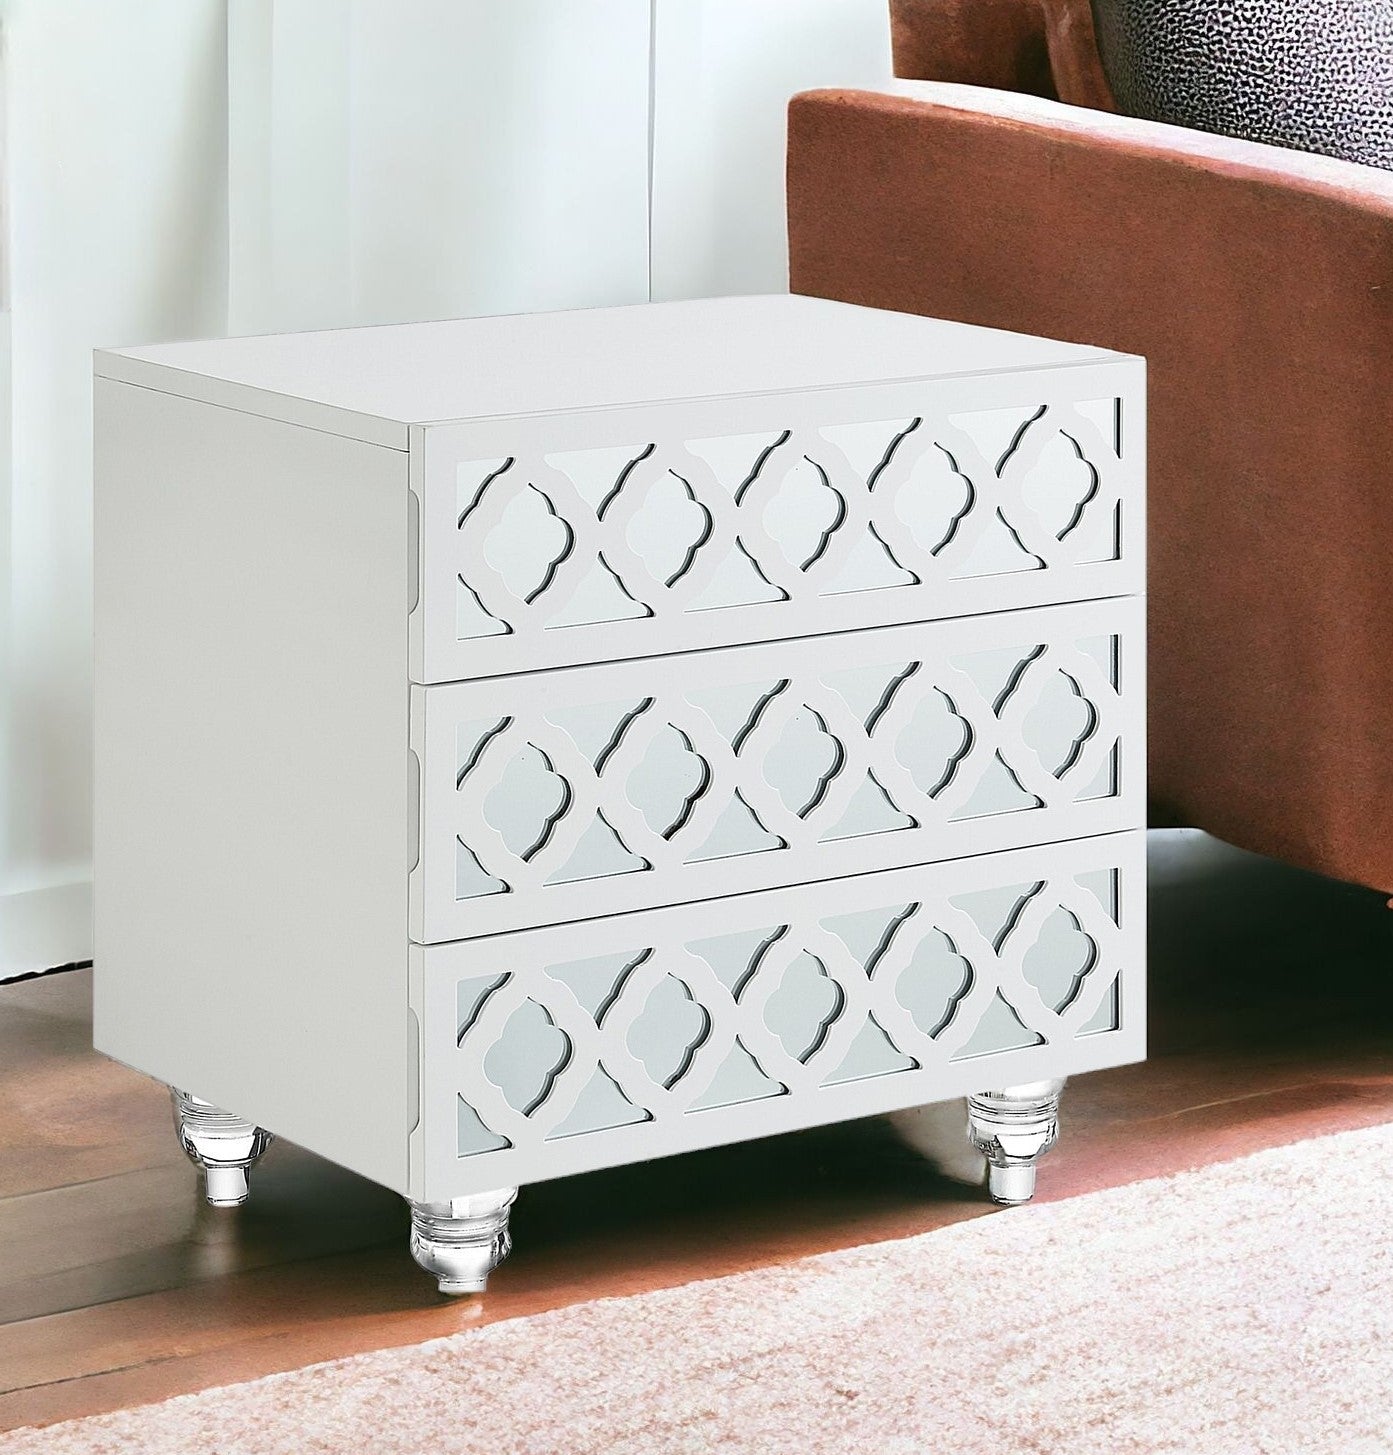 24" Clear and White Mirrored End Table with Three Drawers